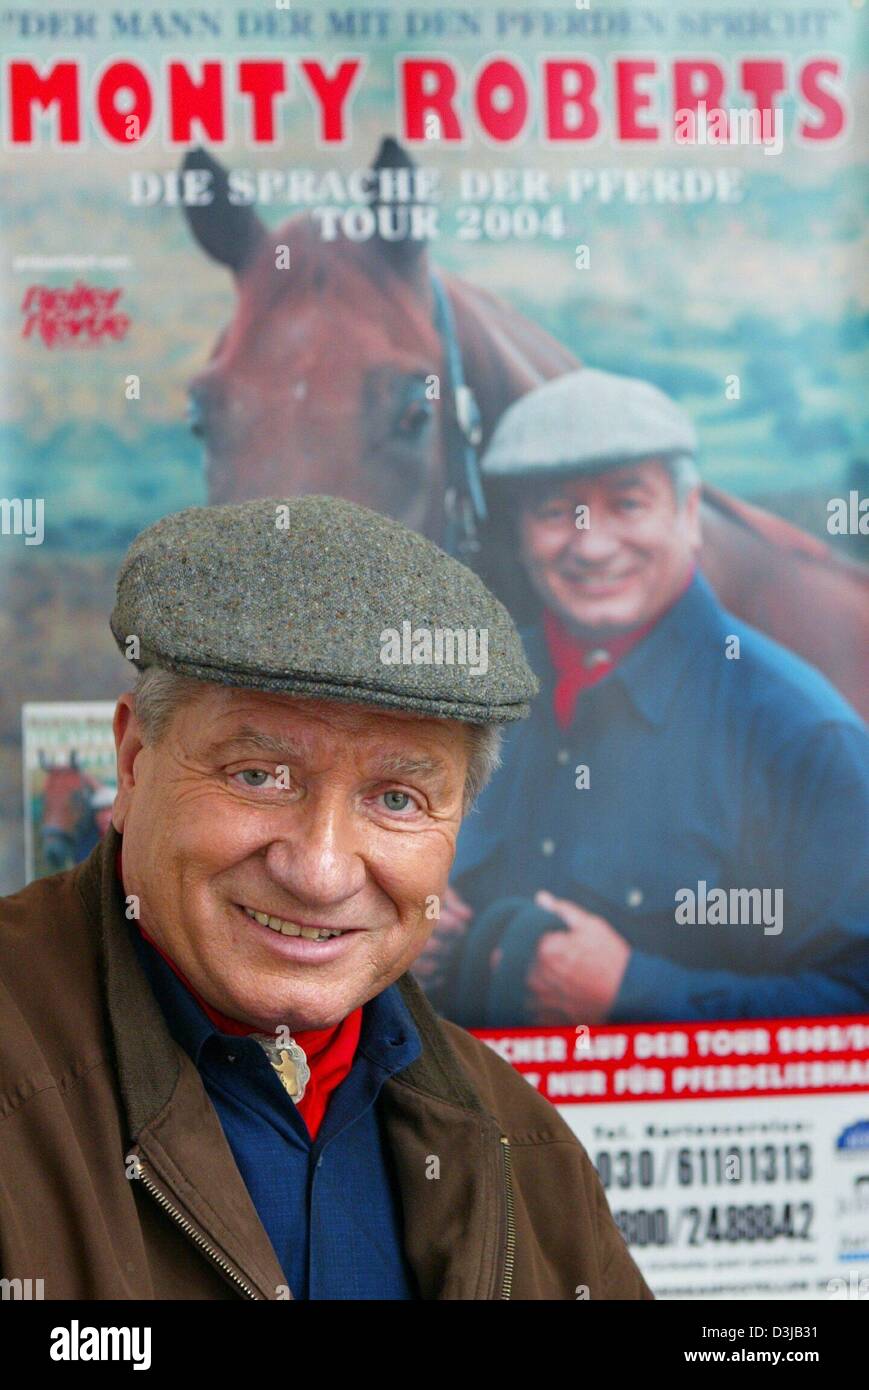 (dpa) - Monty Roberts, US horse trainer and author (a.o. The Language of Horses) stands in front of a poster which advertises him after an interview appointment in Berlin, 12 March 2004. Roberts, who is also known as 'The horse wisperer', started working with horses as an adolescent and became Rodeo champion later on. Eventually he became a renown specialists for horses, famous for Stock Photo